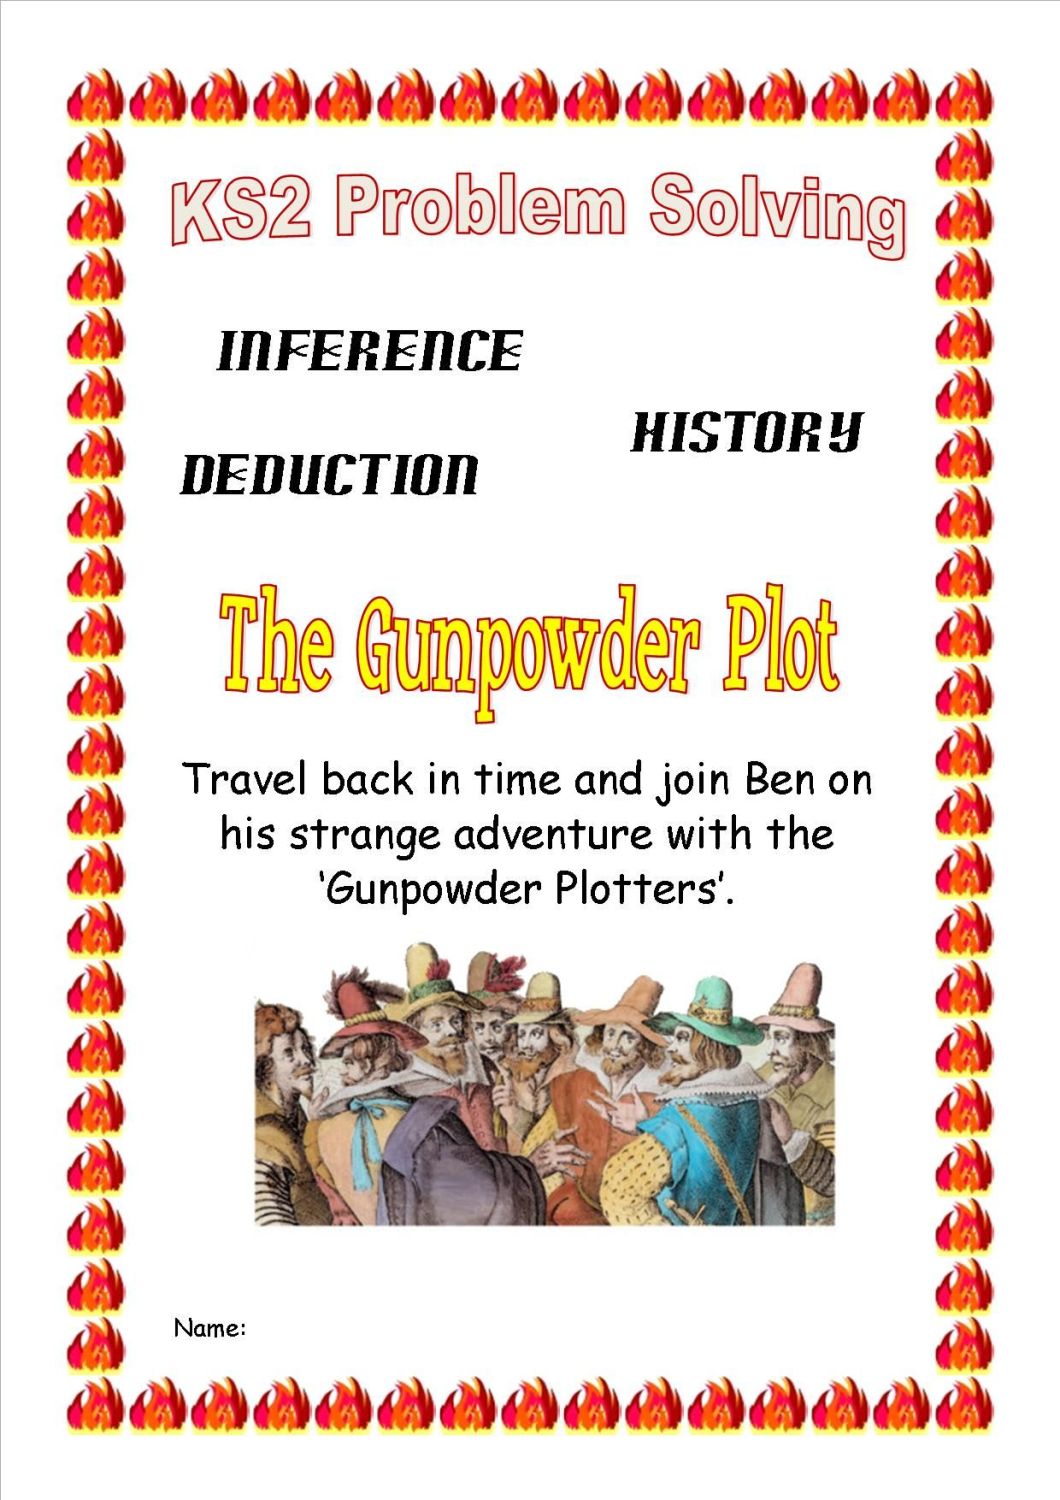 KS2 Guy Fawkes Time Travel Historical Problem Solving Booklet with inferenc